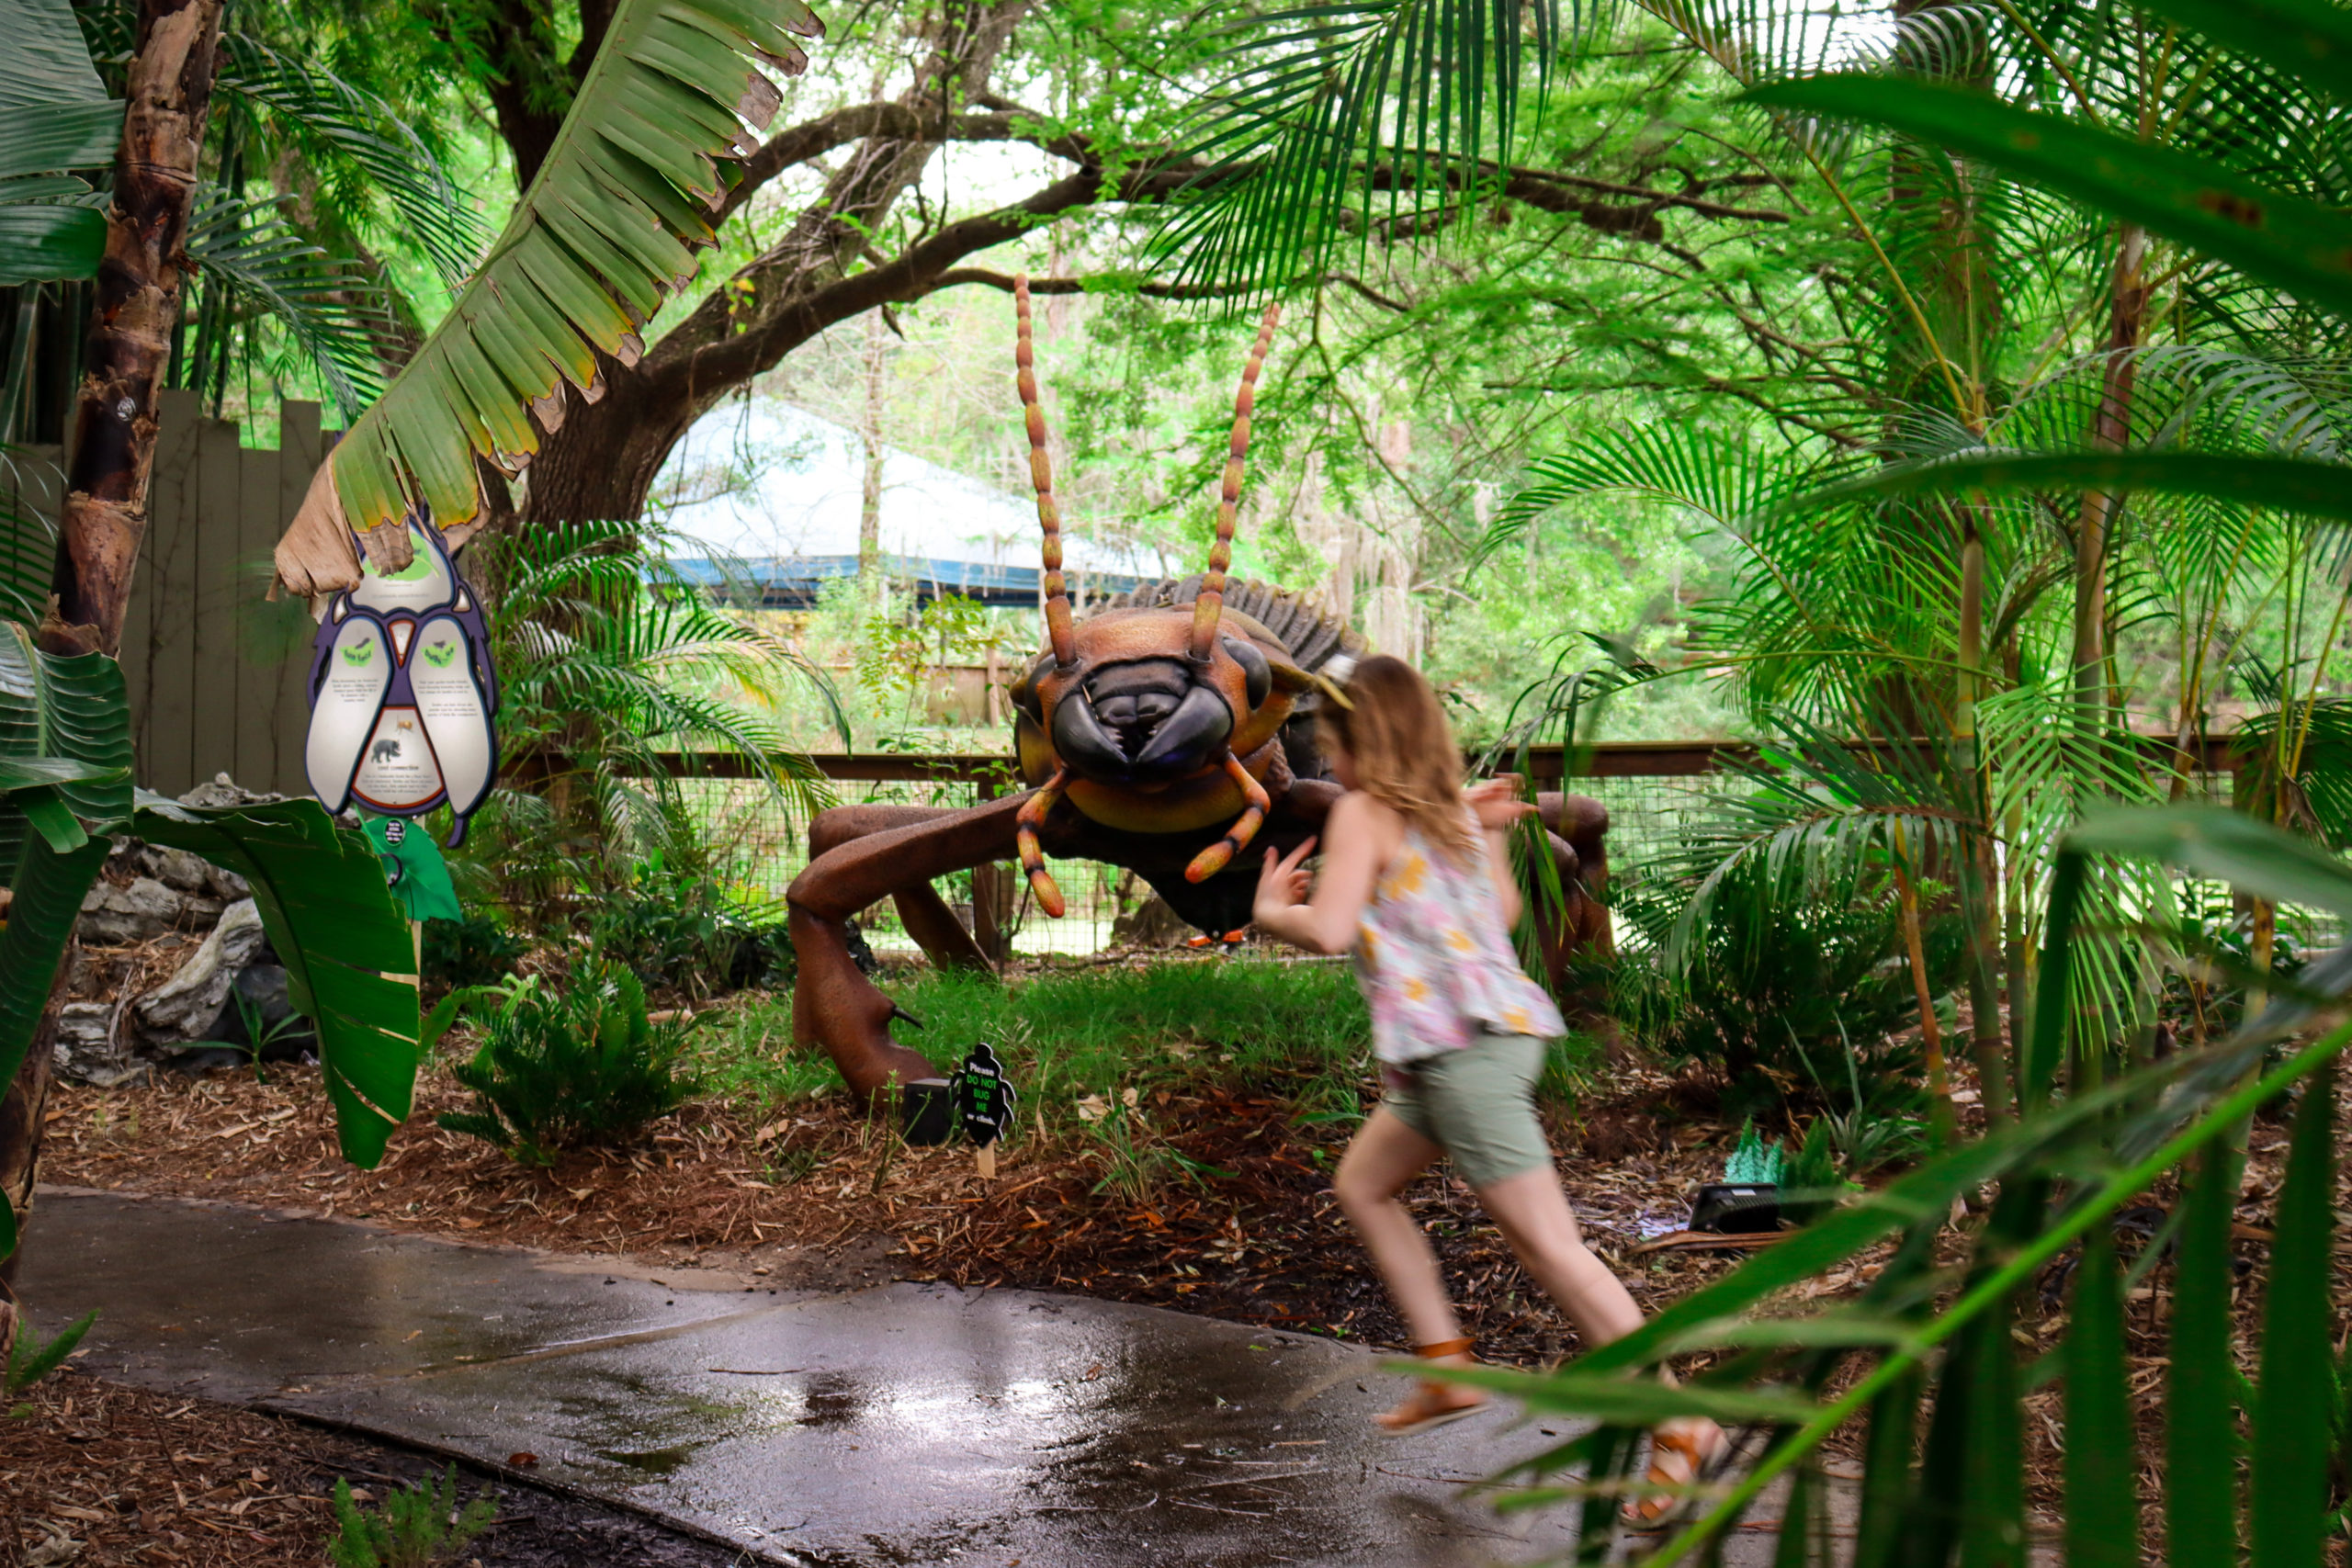 A young girl races by a large animatronic insect at ZooTampa, a must do when you visit Tampa Bay with Kids.